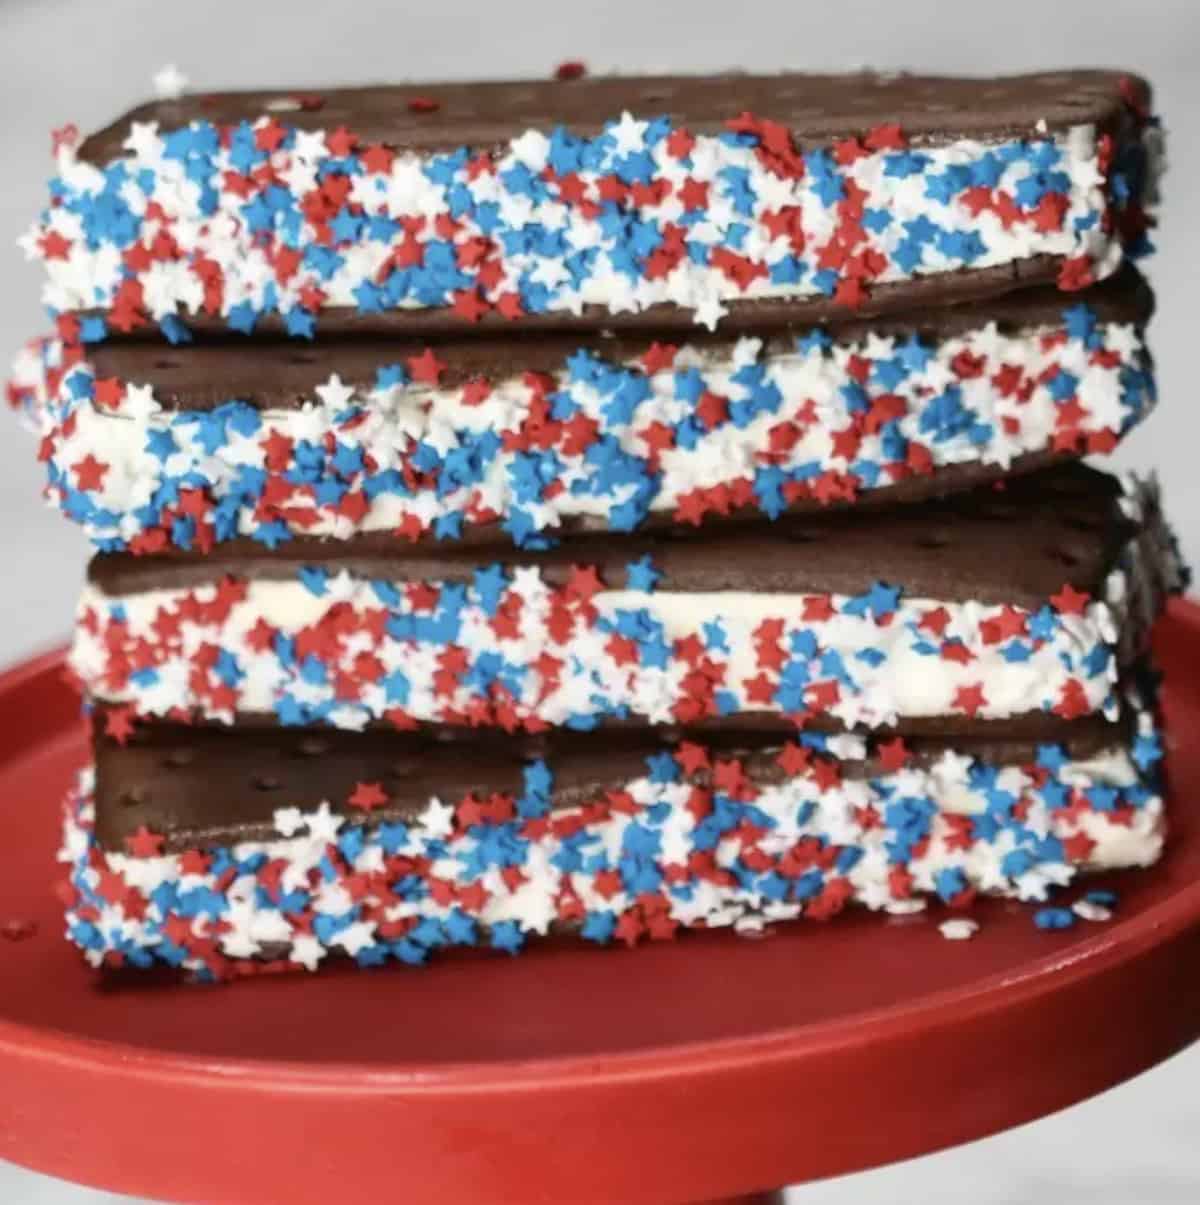 Ice cream sandwiches with sprinkles on the sides.